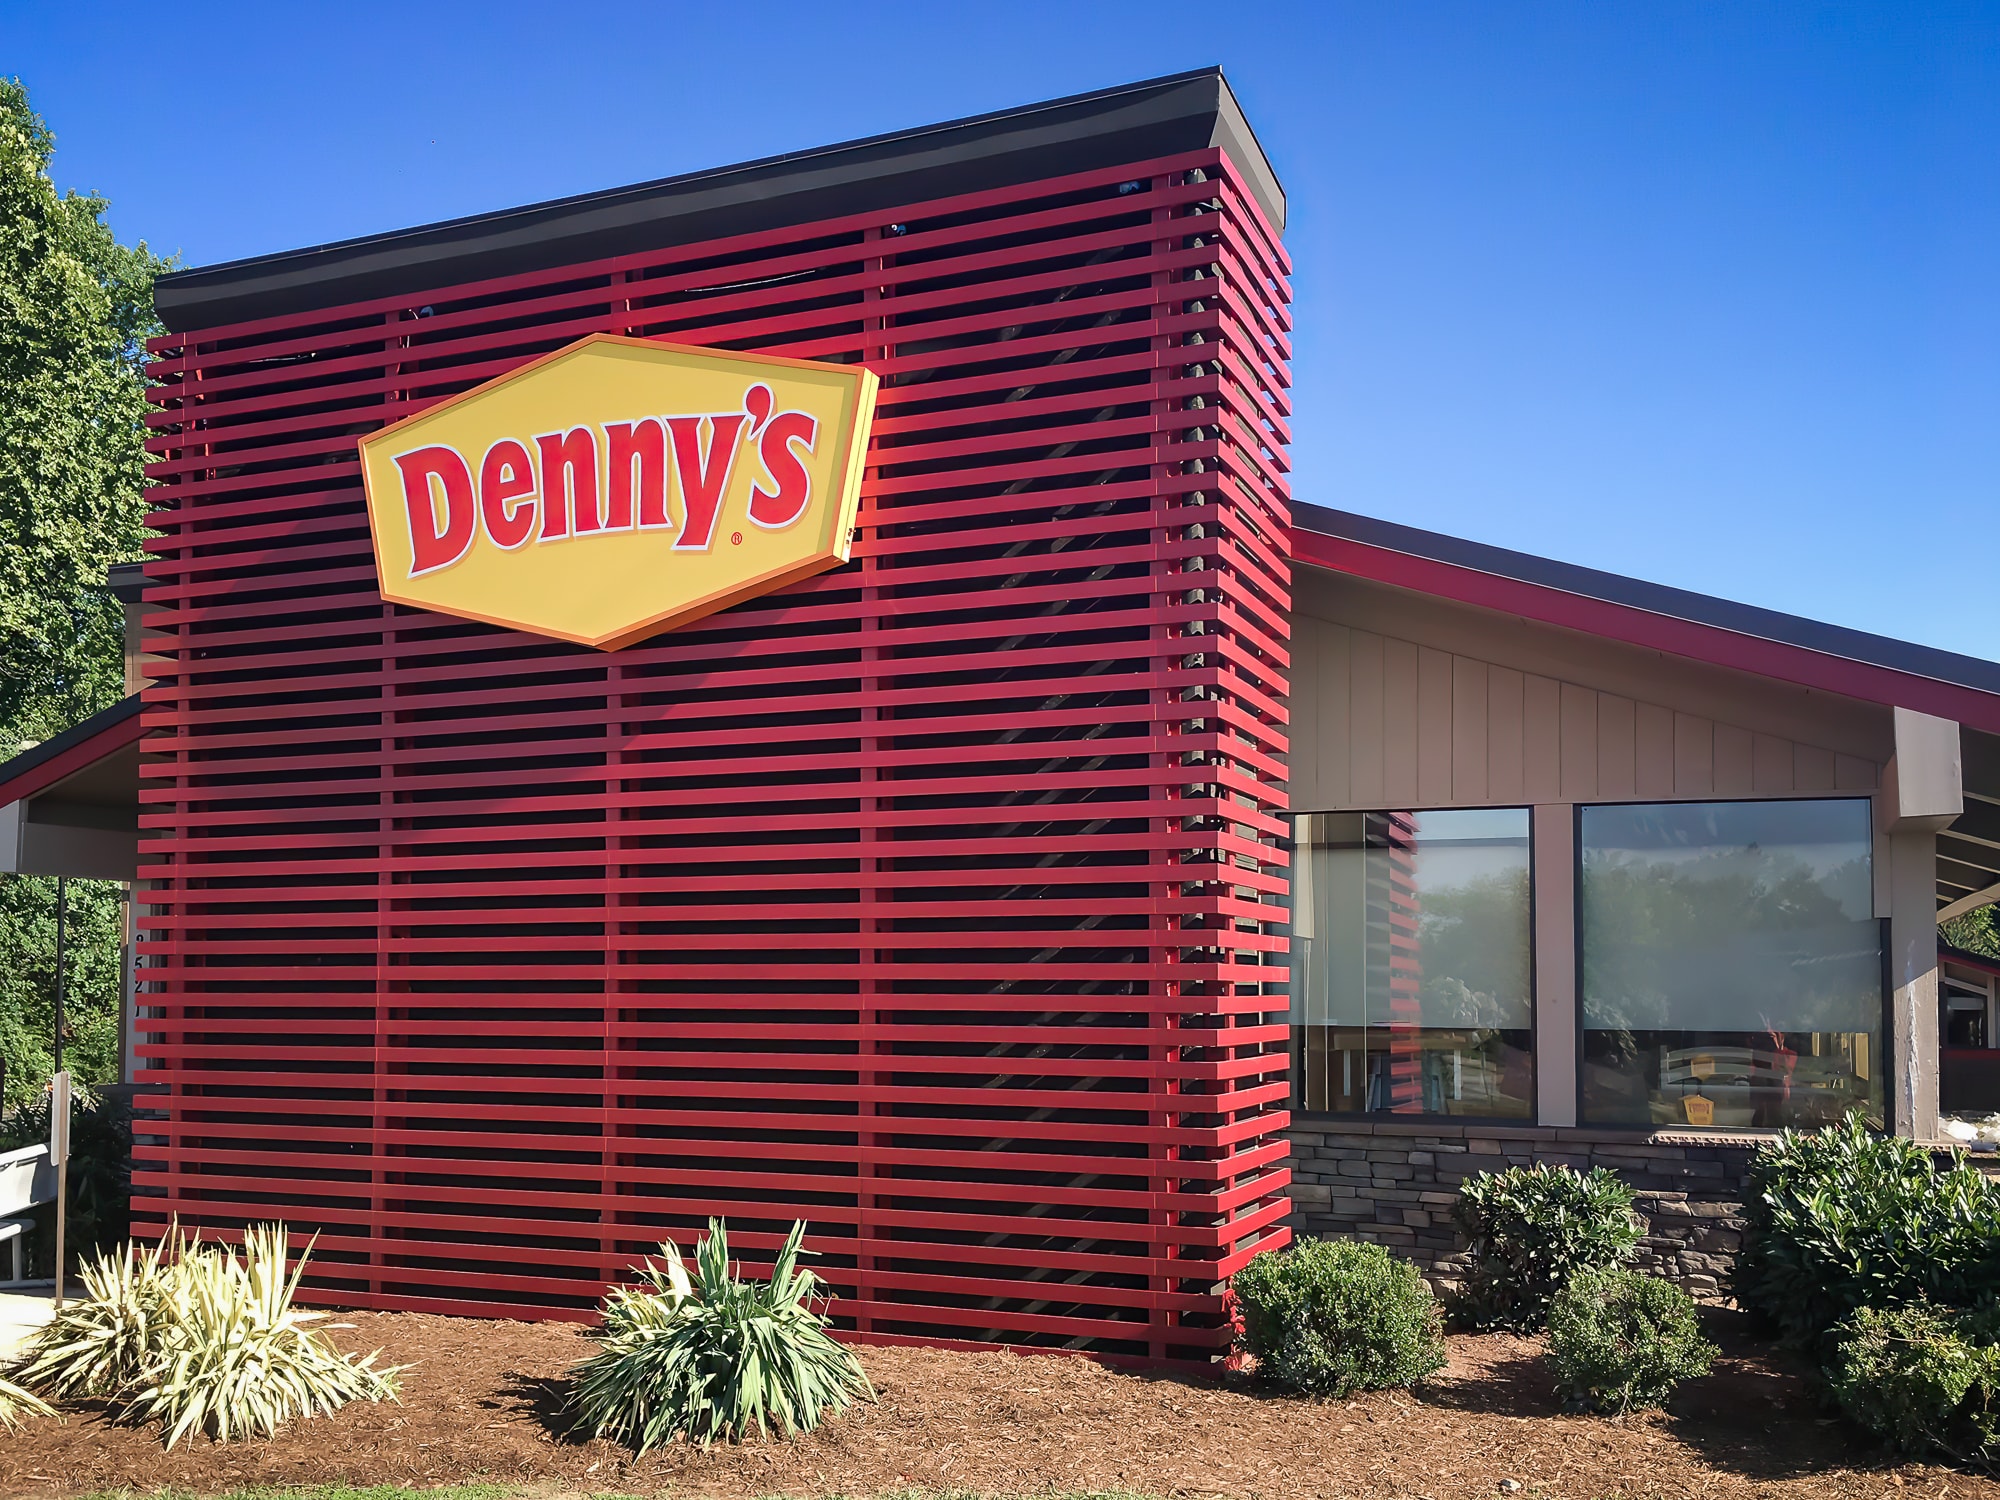 Awnex Featured Project -Architectural Aluminum Wall Screens - Denny’s - Greenville, South Carolina